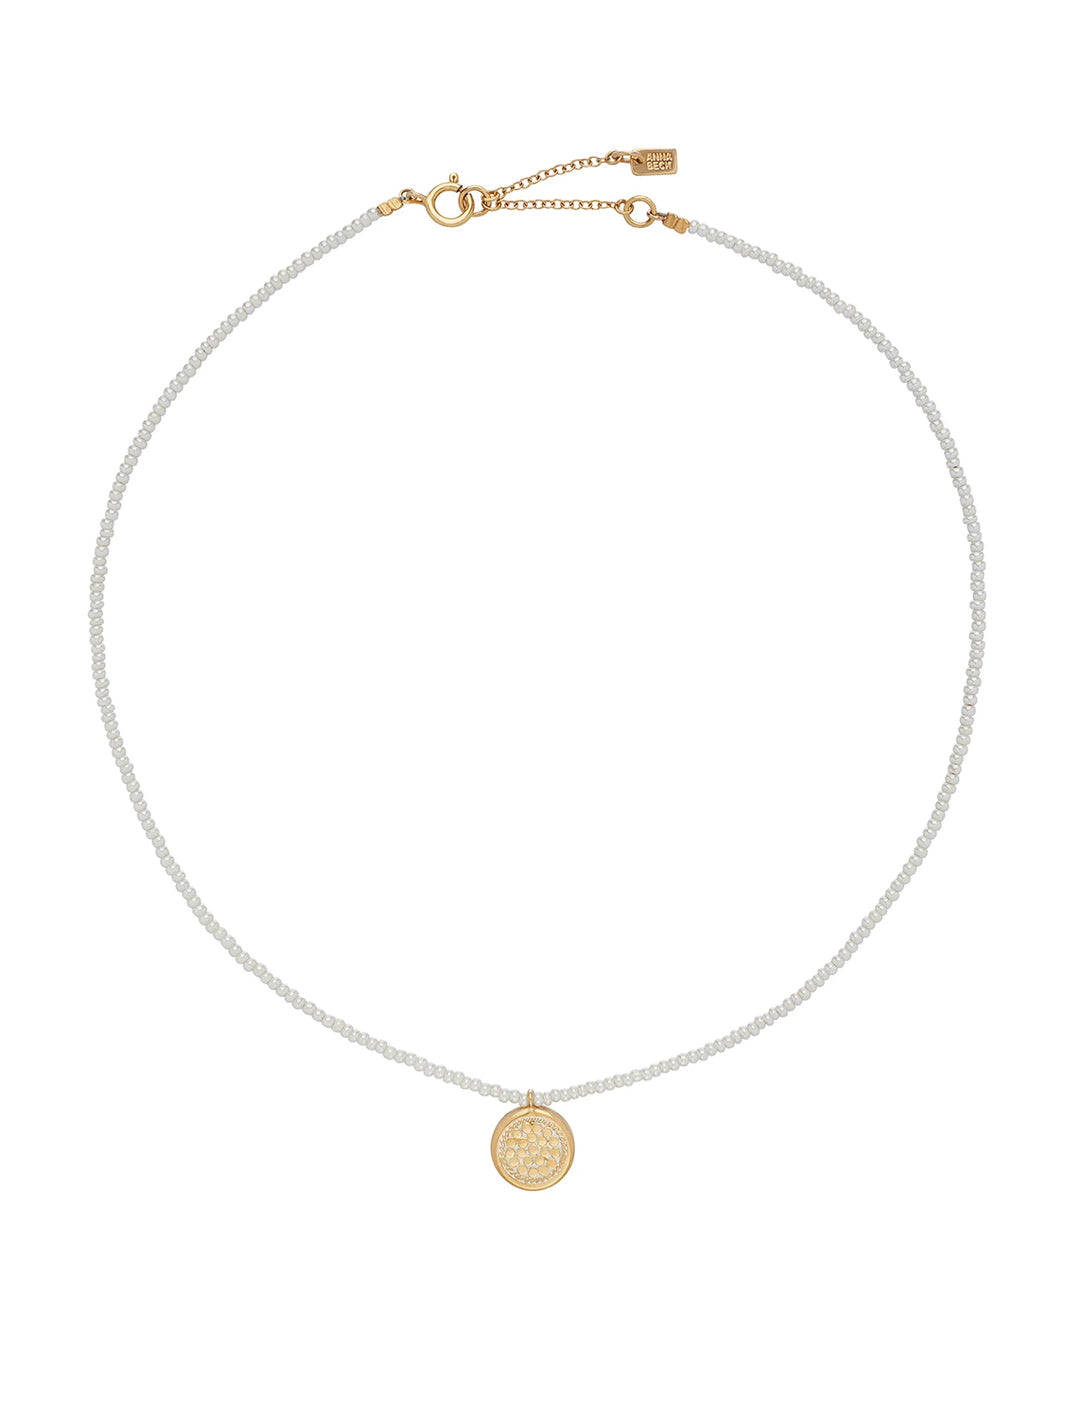 Overhead view of Anna Beck's delicate beaded pearl circle pendant necklace in gold.